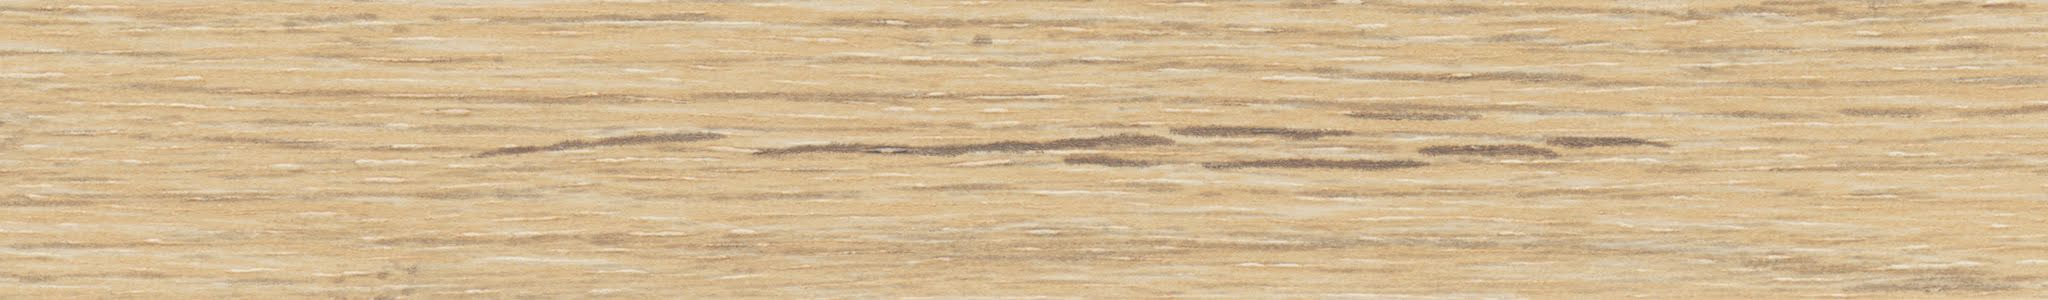 ABS K086 PW Natural Rockford Hickory 22x2mm HD 24086